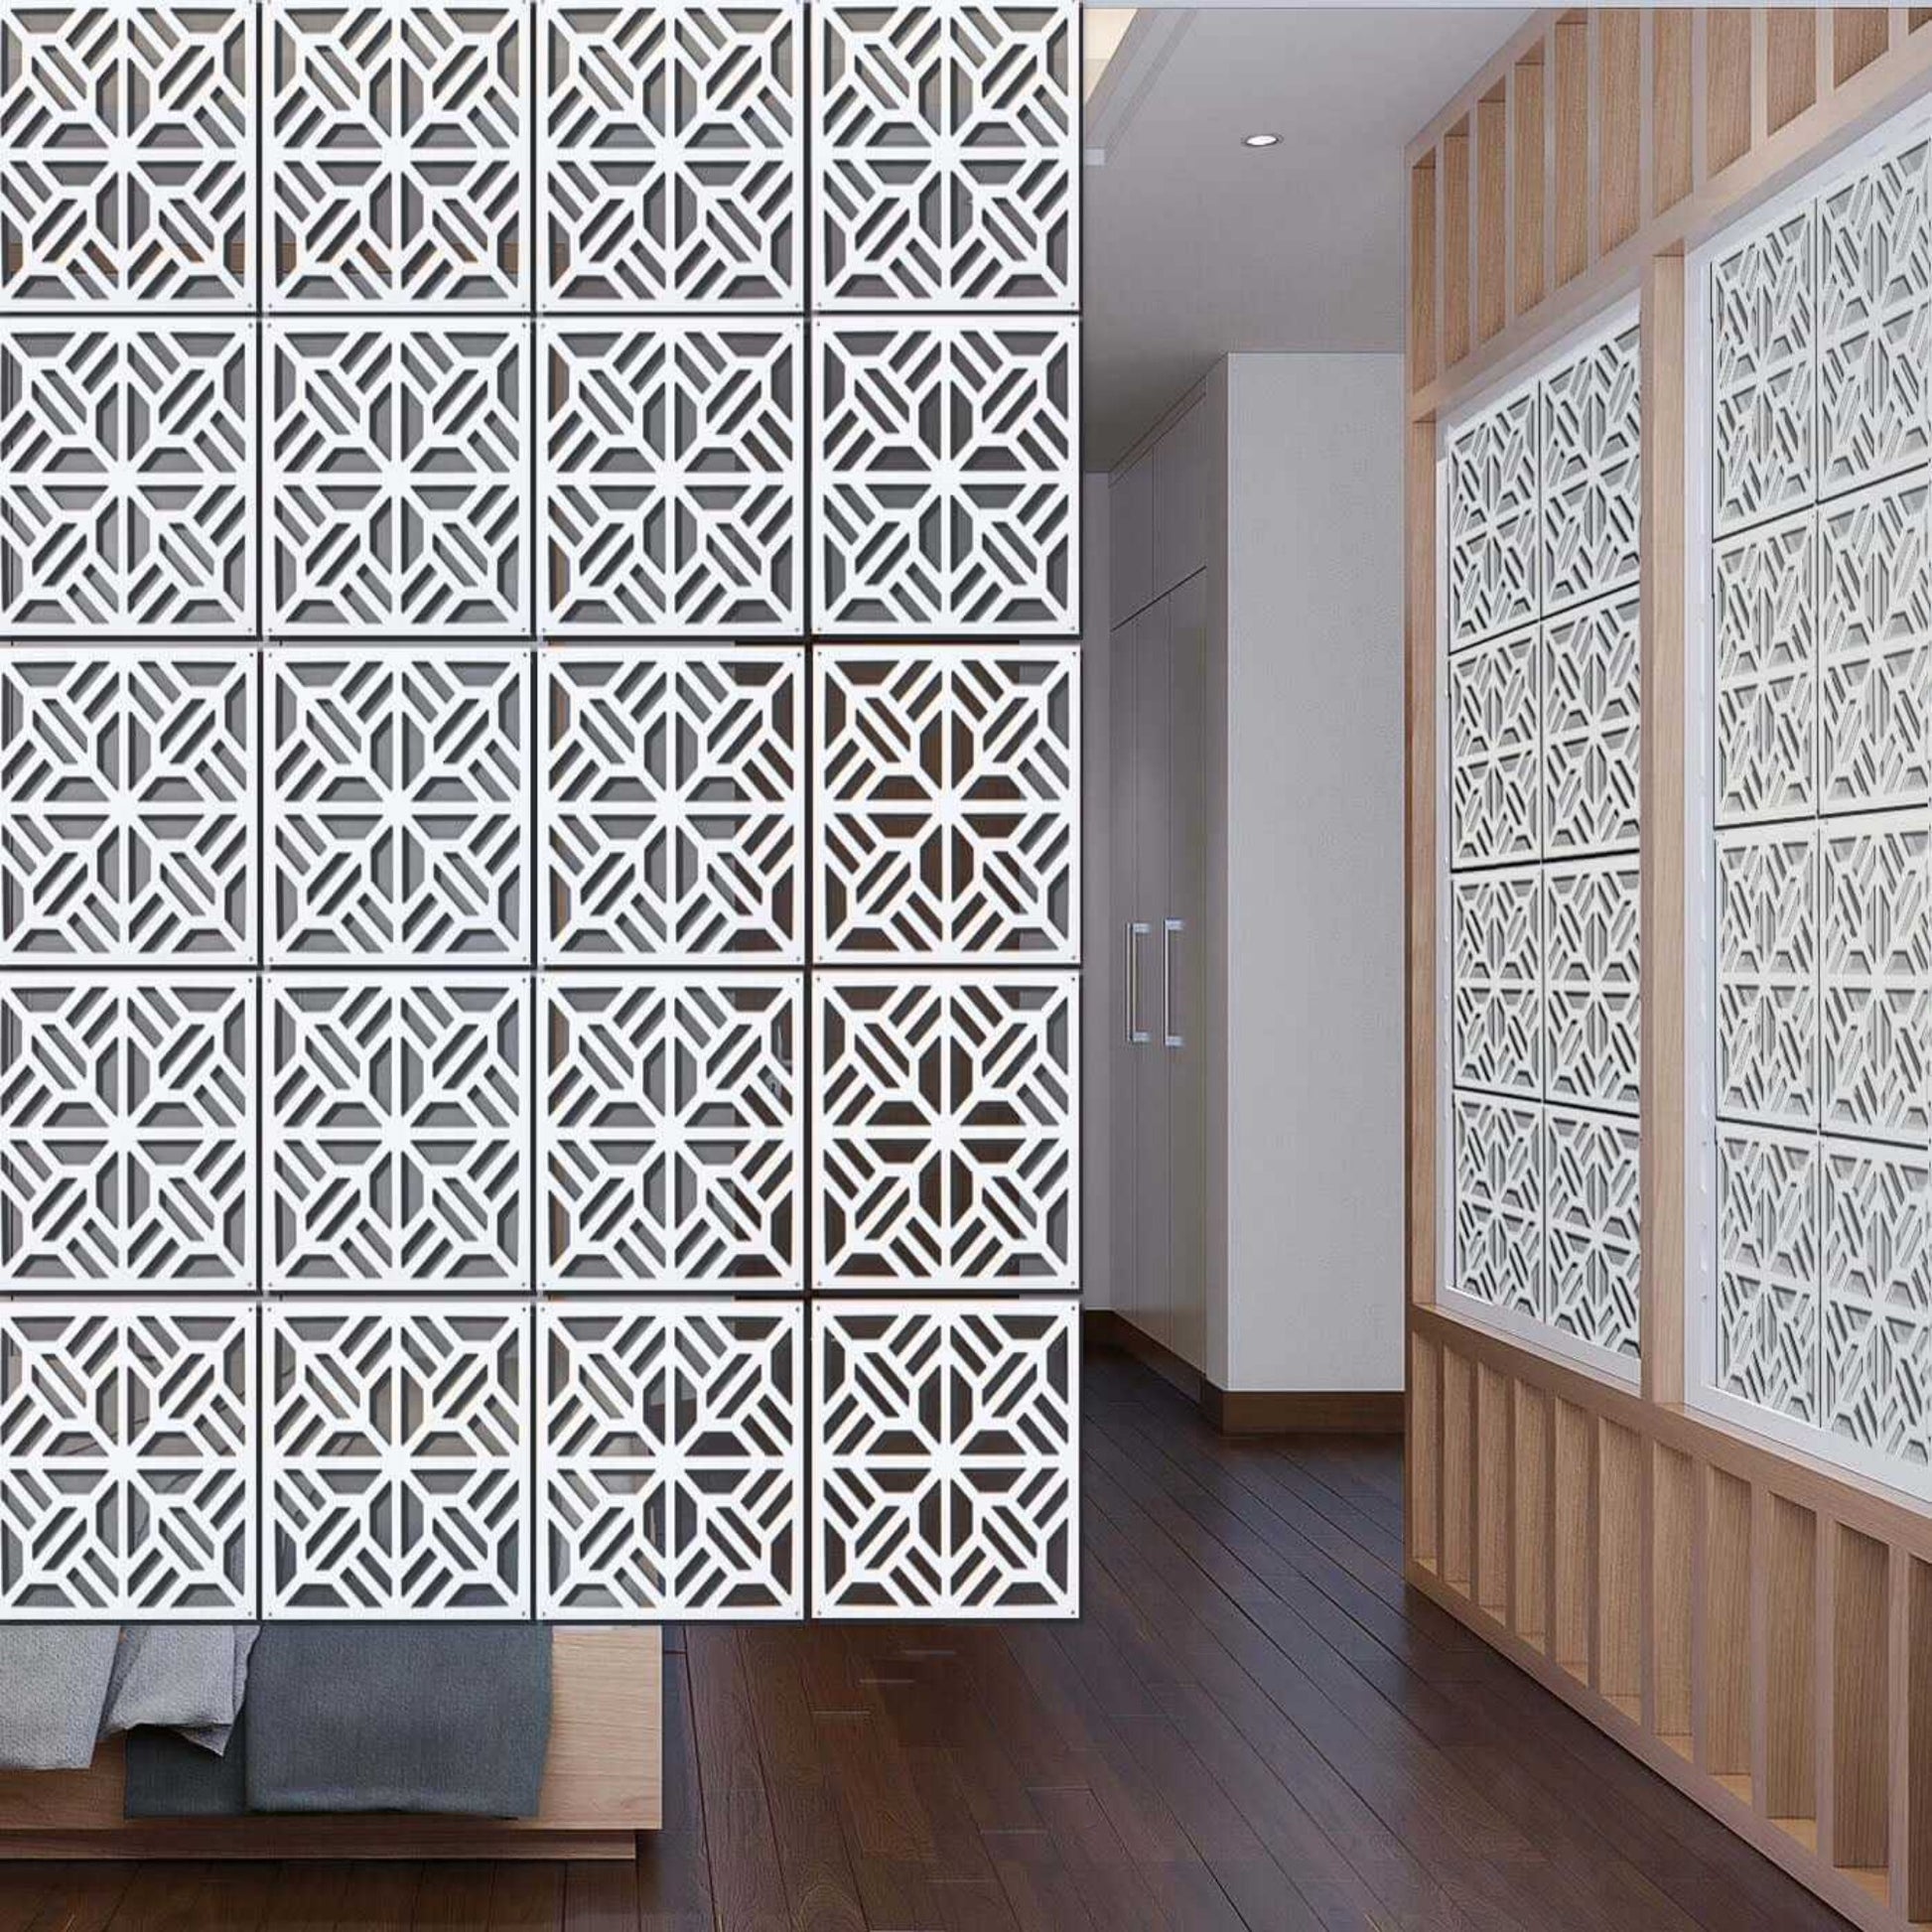 PVC Hanging Room Divider, Wall Cover, Privacy Screen